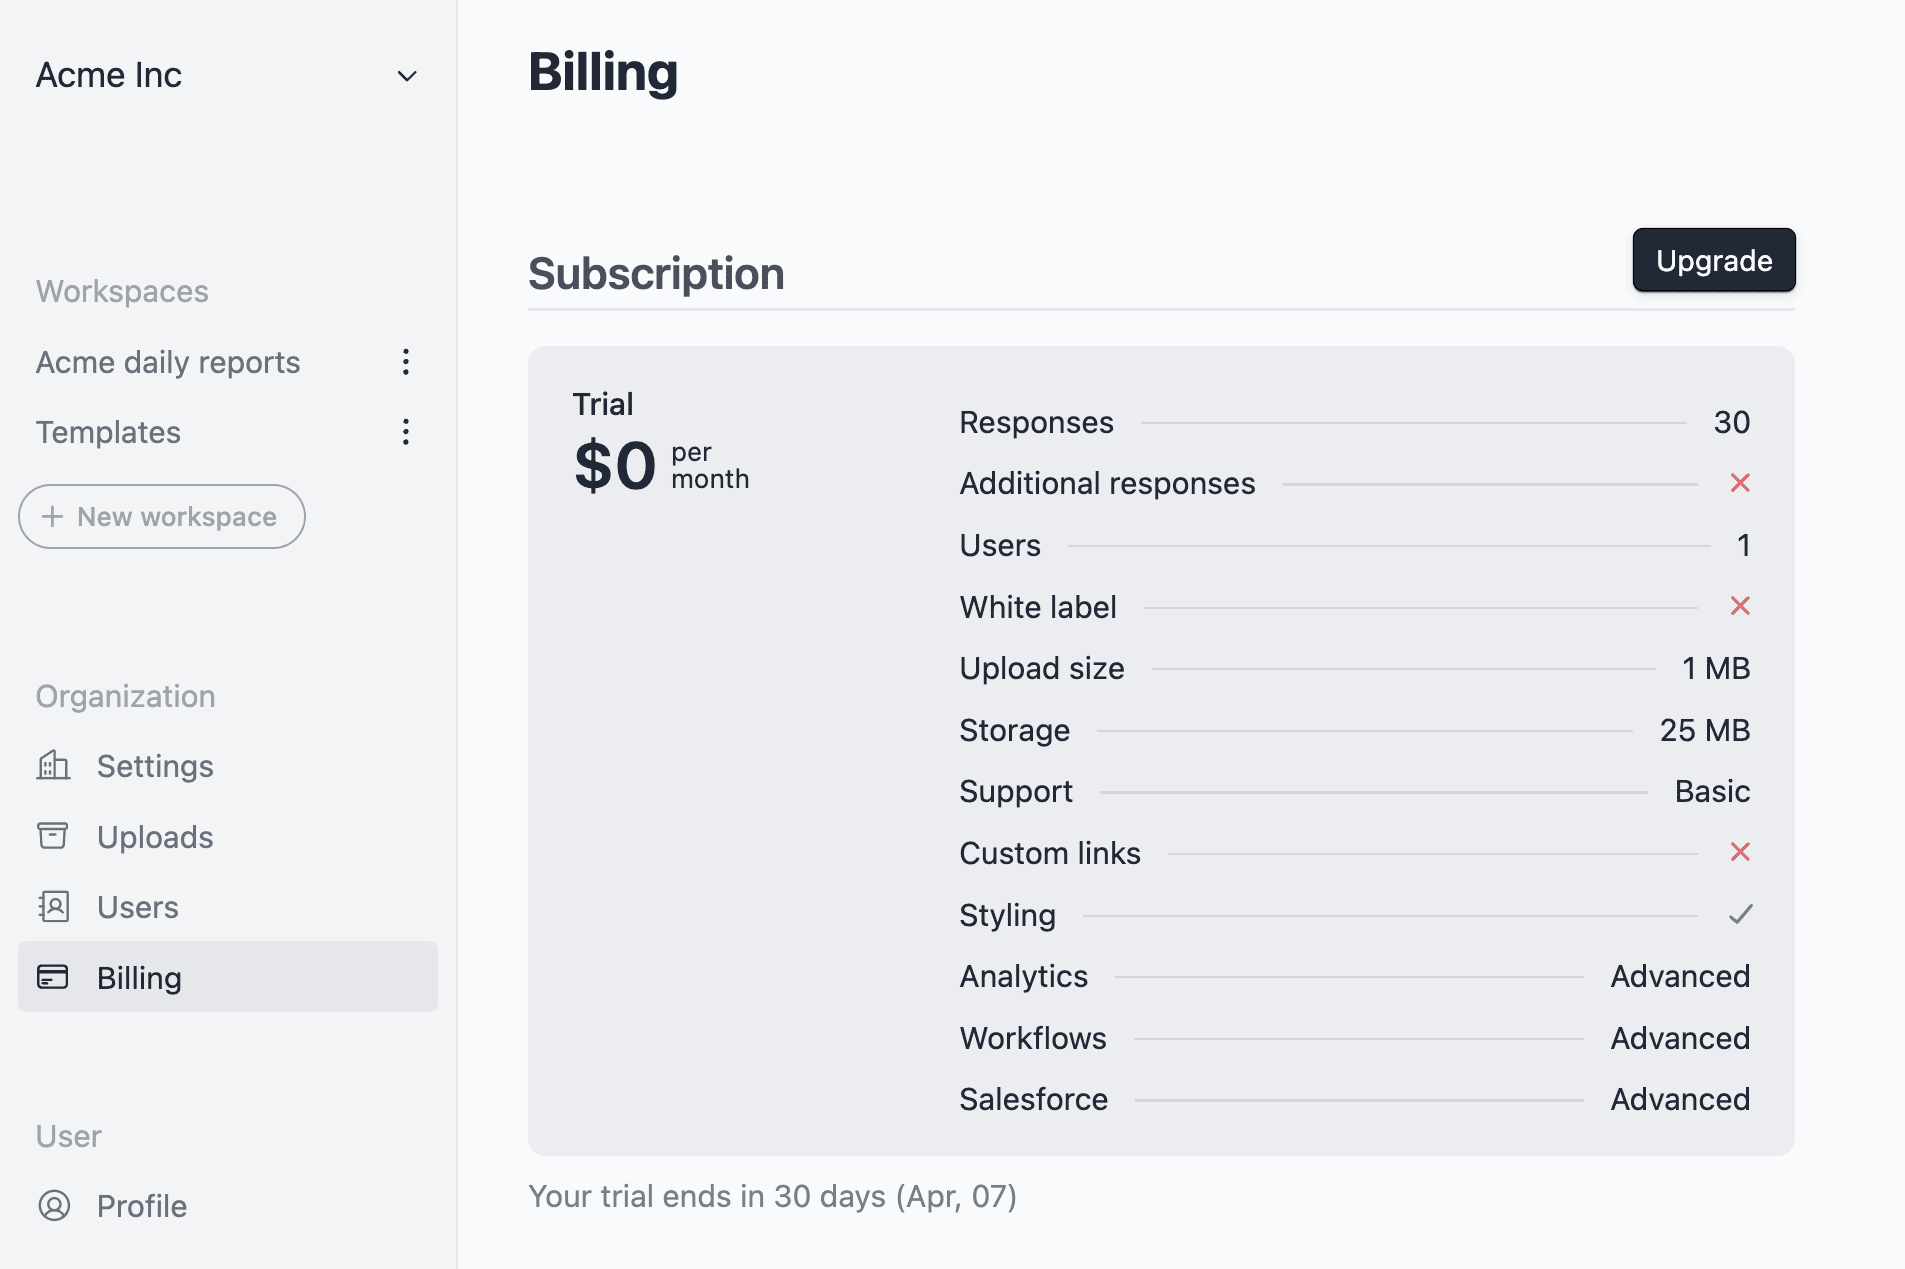 Subscription upgrade section